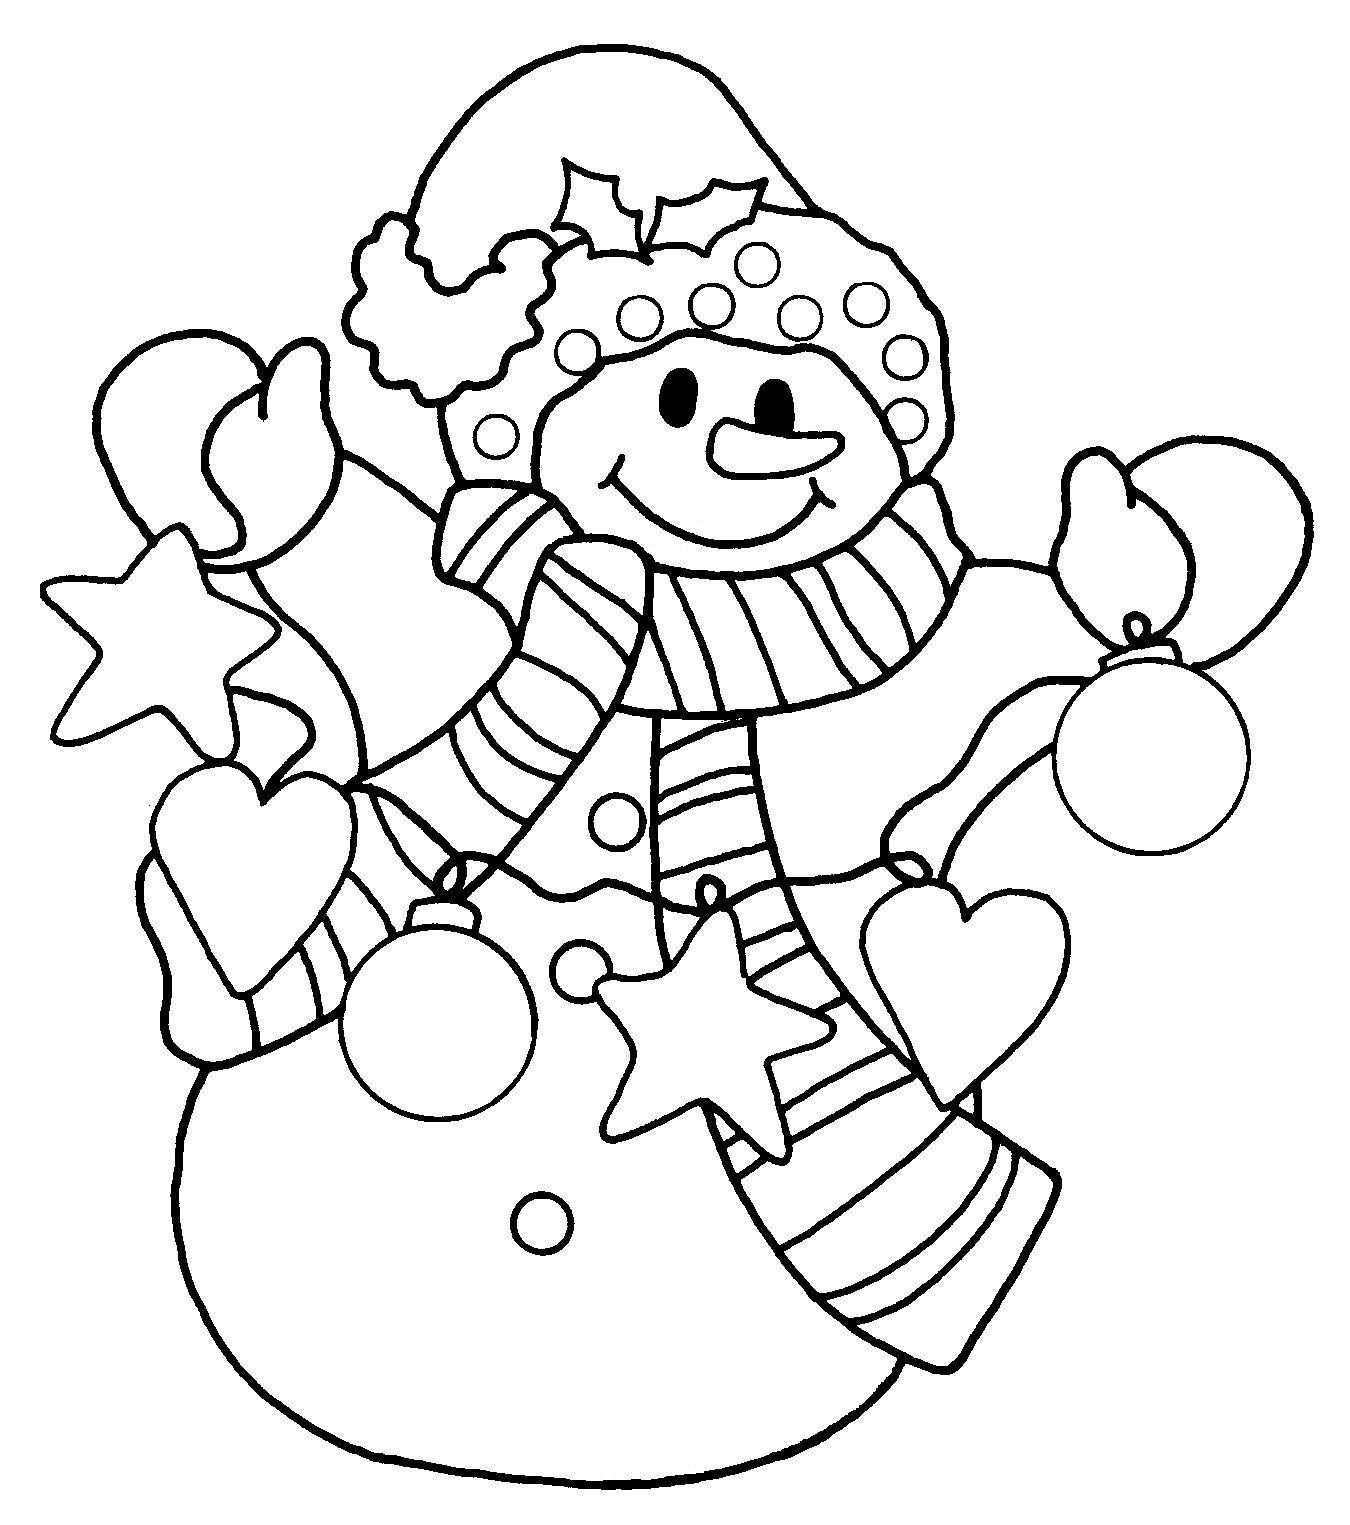 Christmas Coloring Pictures For Kids
 DZ Doodles Digital Stamps Oodles of Doodles News Freebie